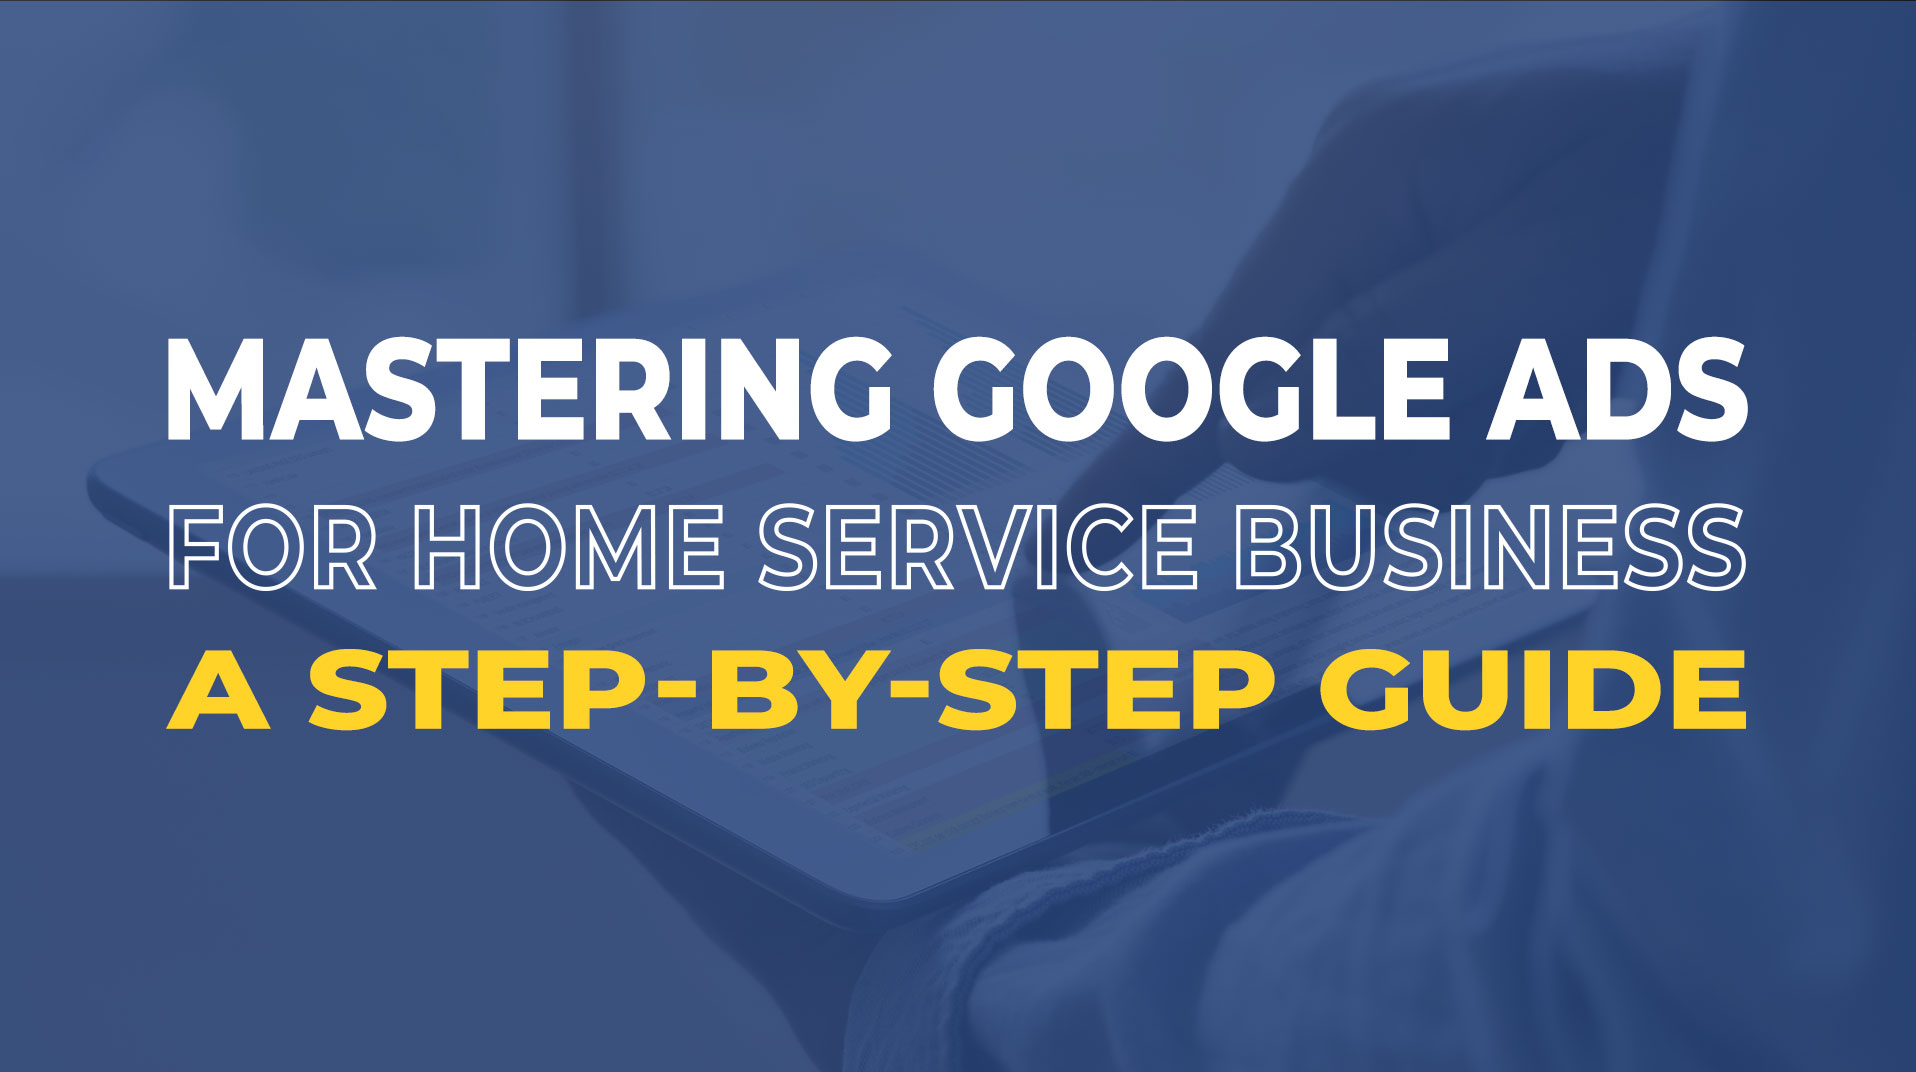 Mastering Google Ads for Your Home Service Business: A Step-by-Step Guide